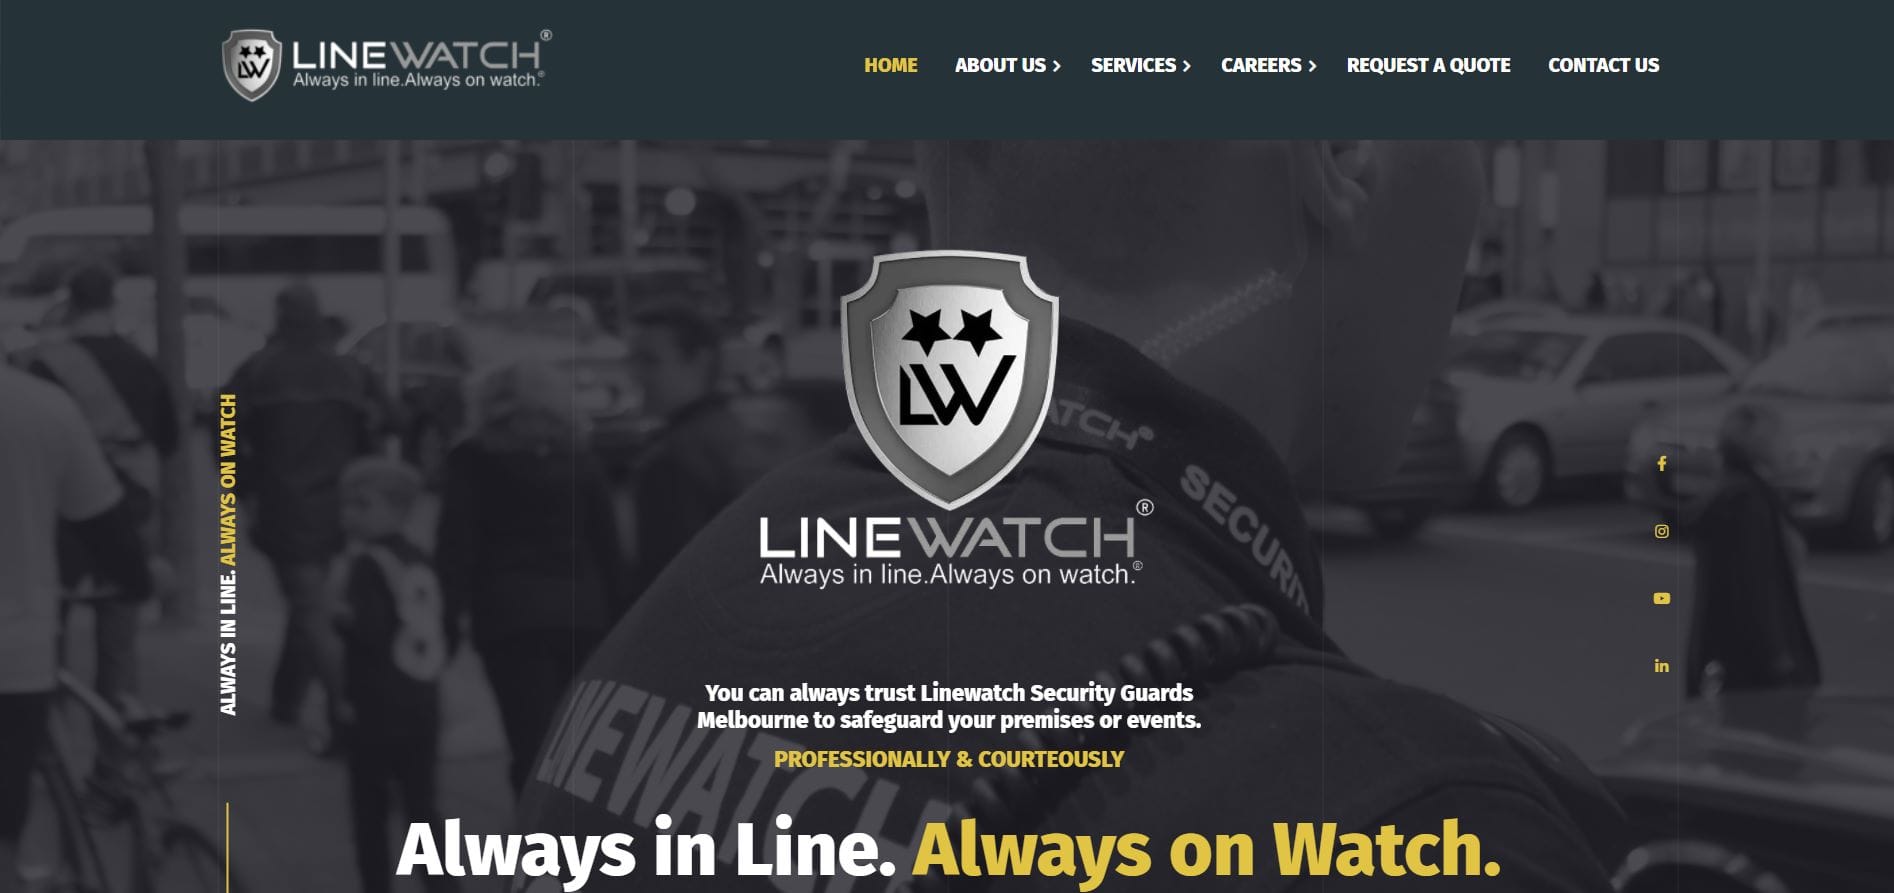 linewatch security guard company melbourne